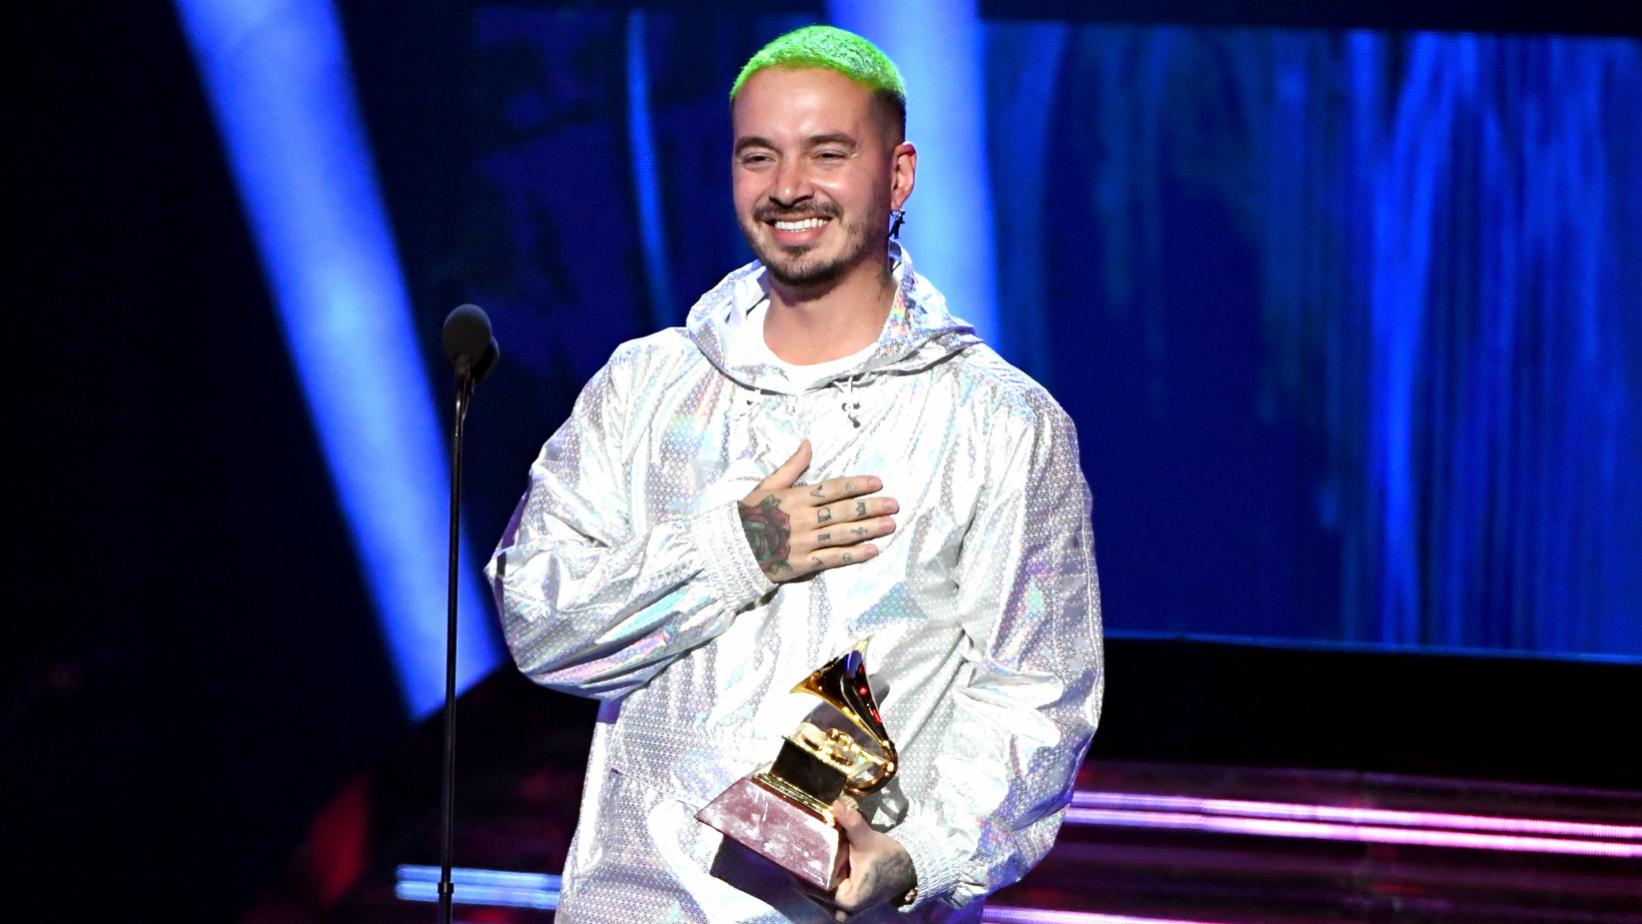 J Balvin Is on the 2020 TIME 100 List